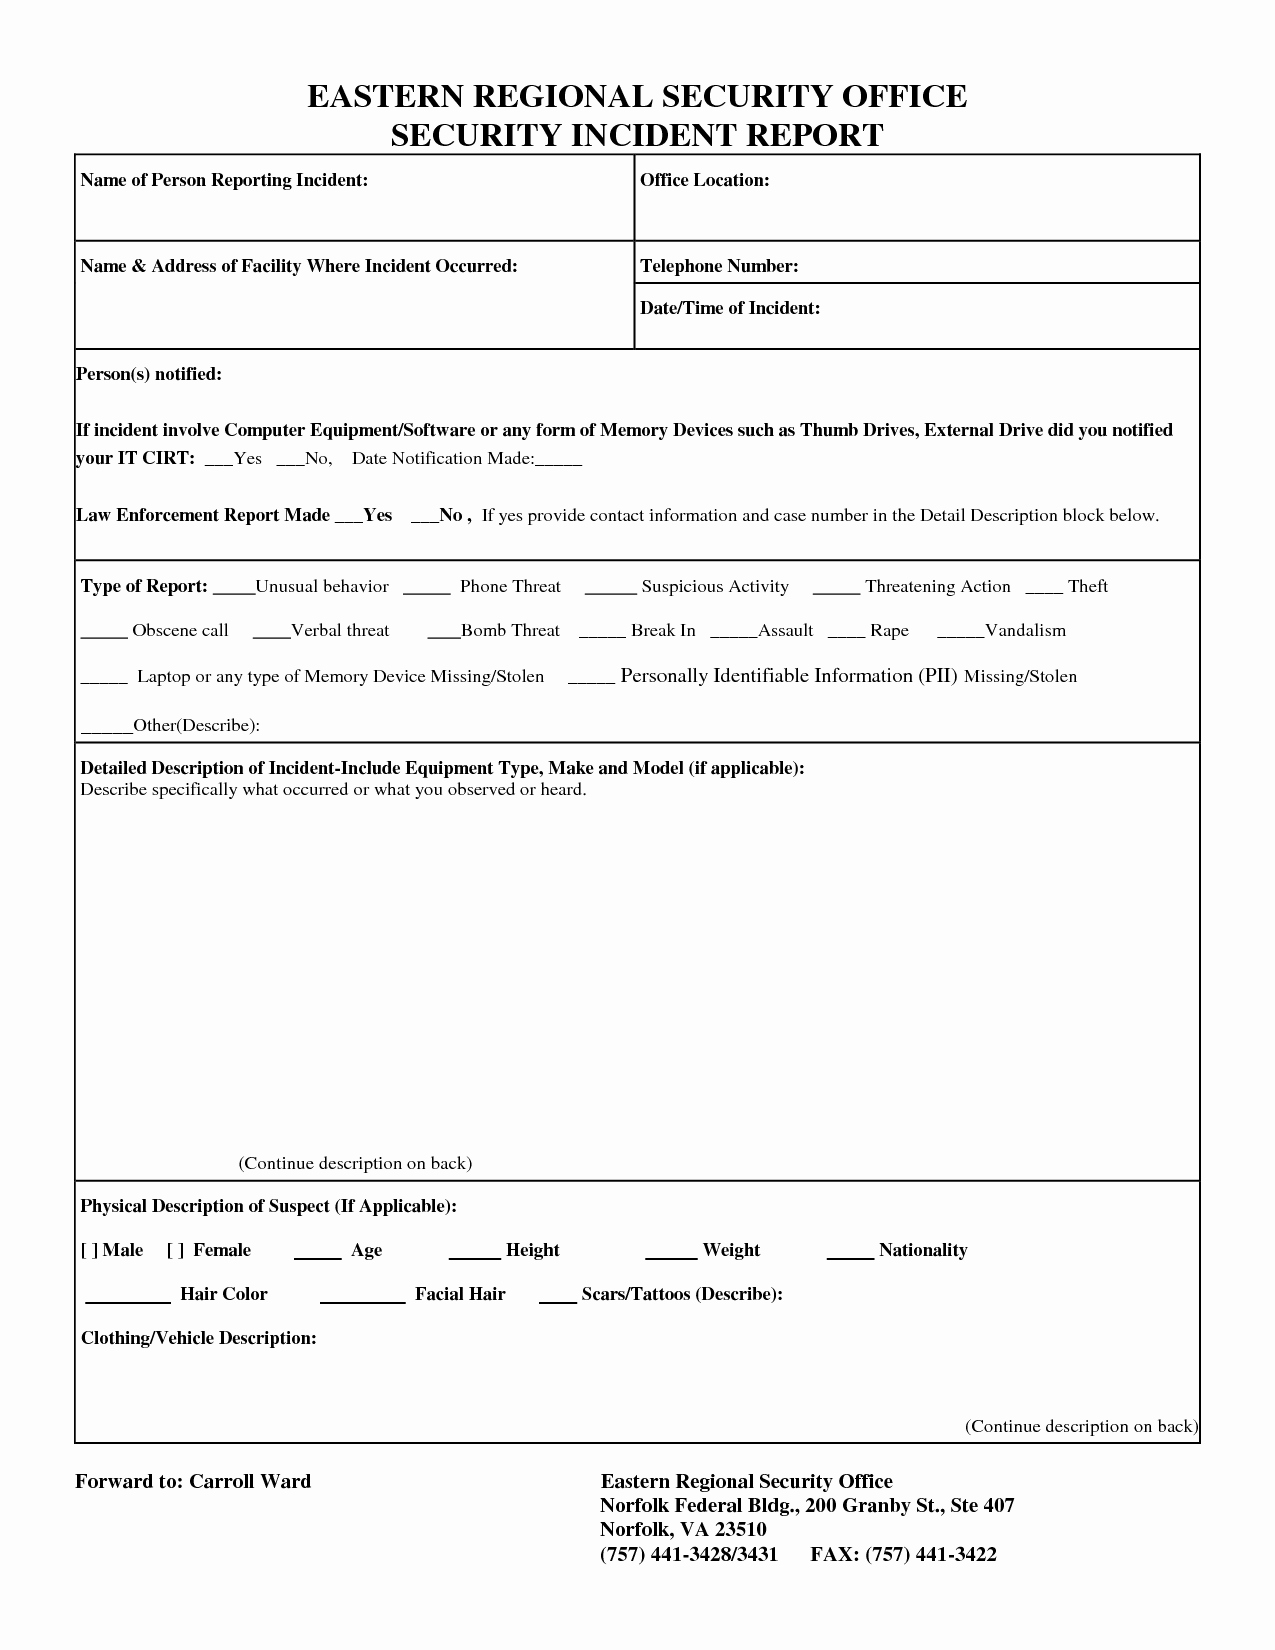 post security incident report template